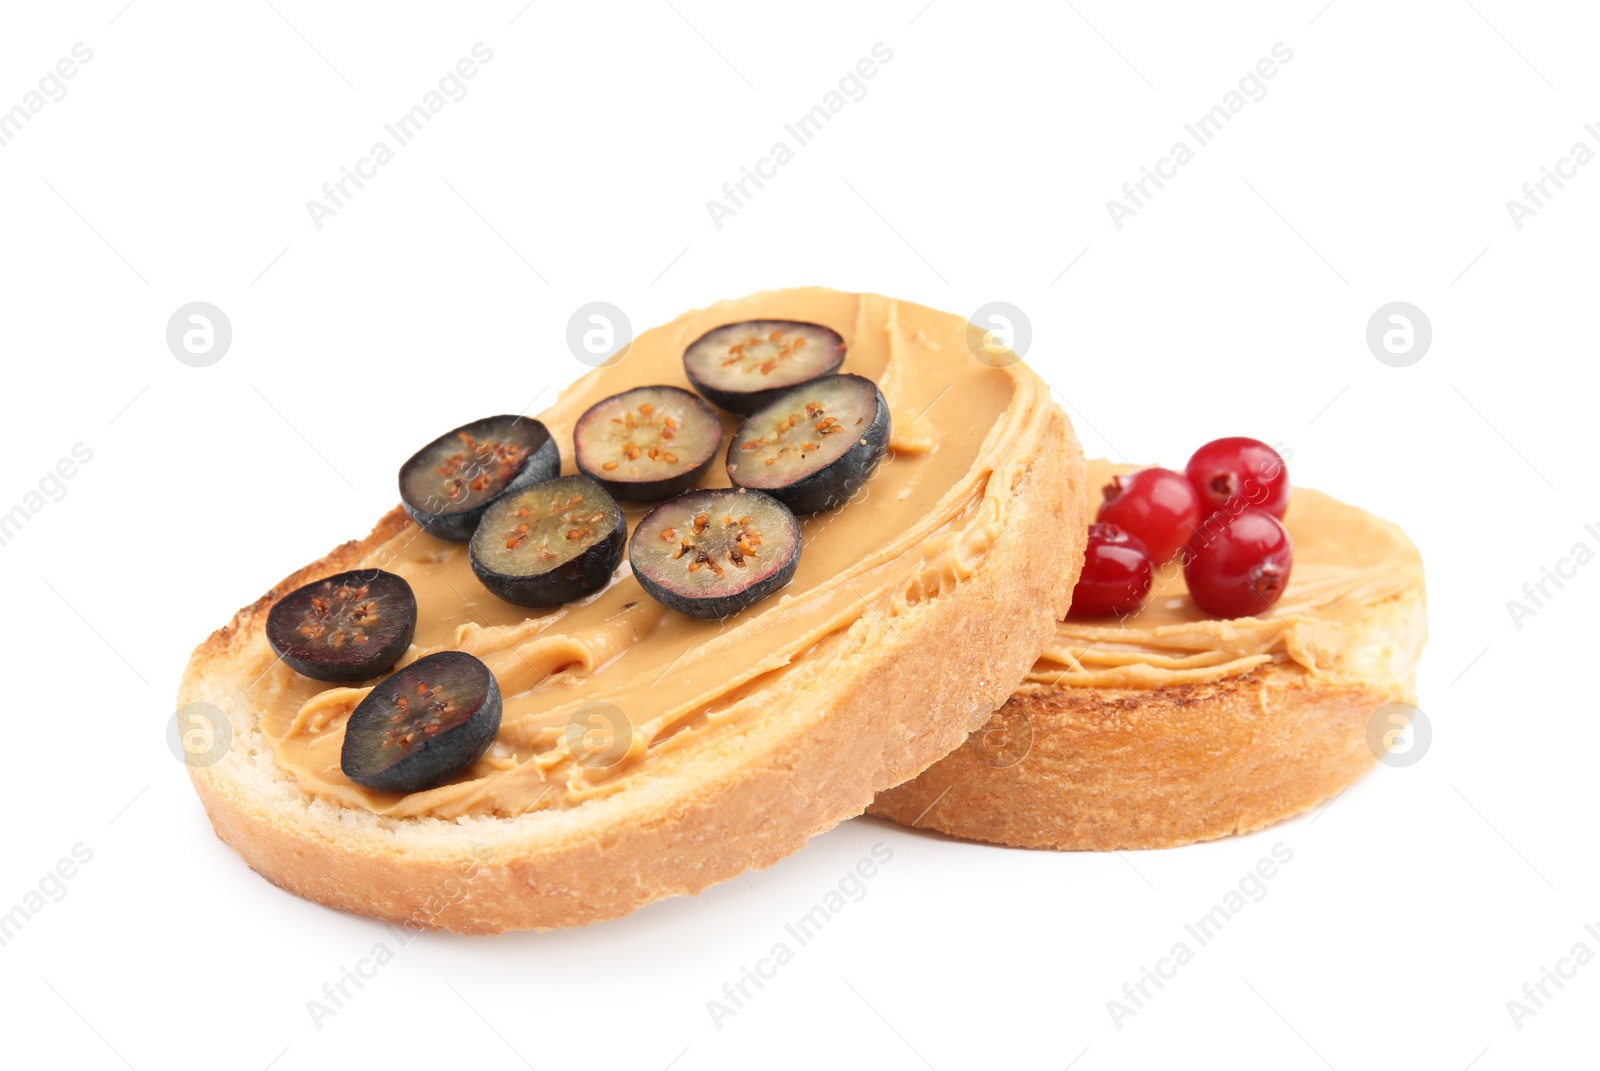 Photo of Slices of bread with peanut butter and berries on white background